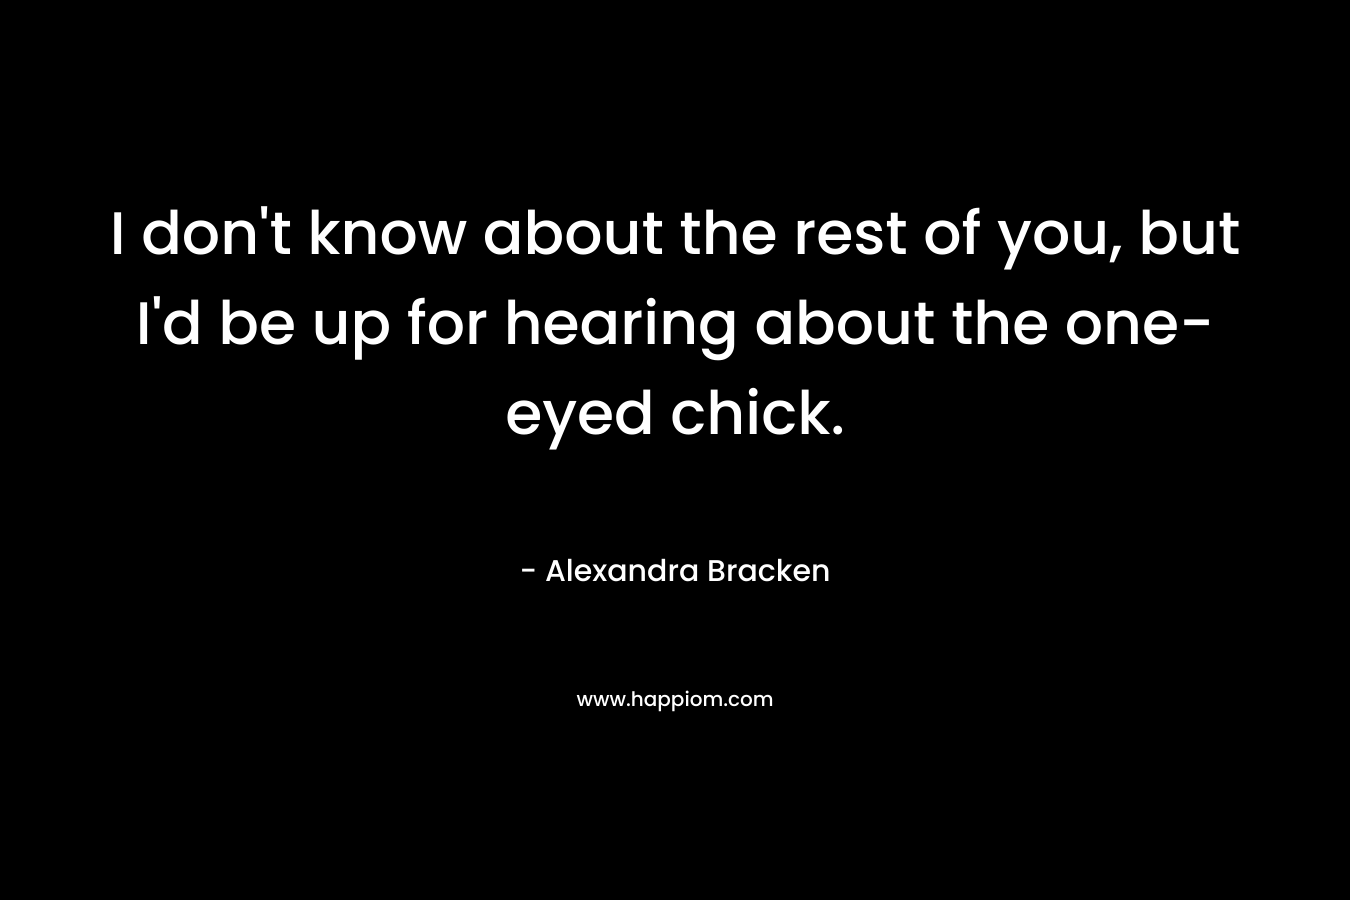 I don’t know about the rest of you, but I’d be up for hearing about the one-eyed chick. – Alexandra Bracken